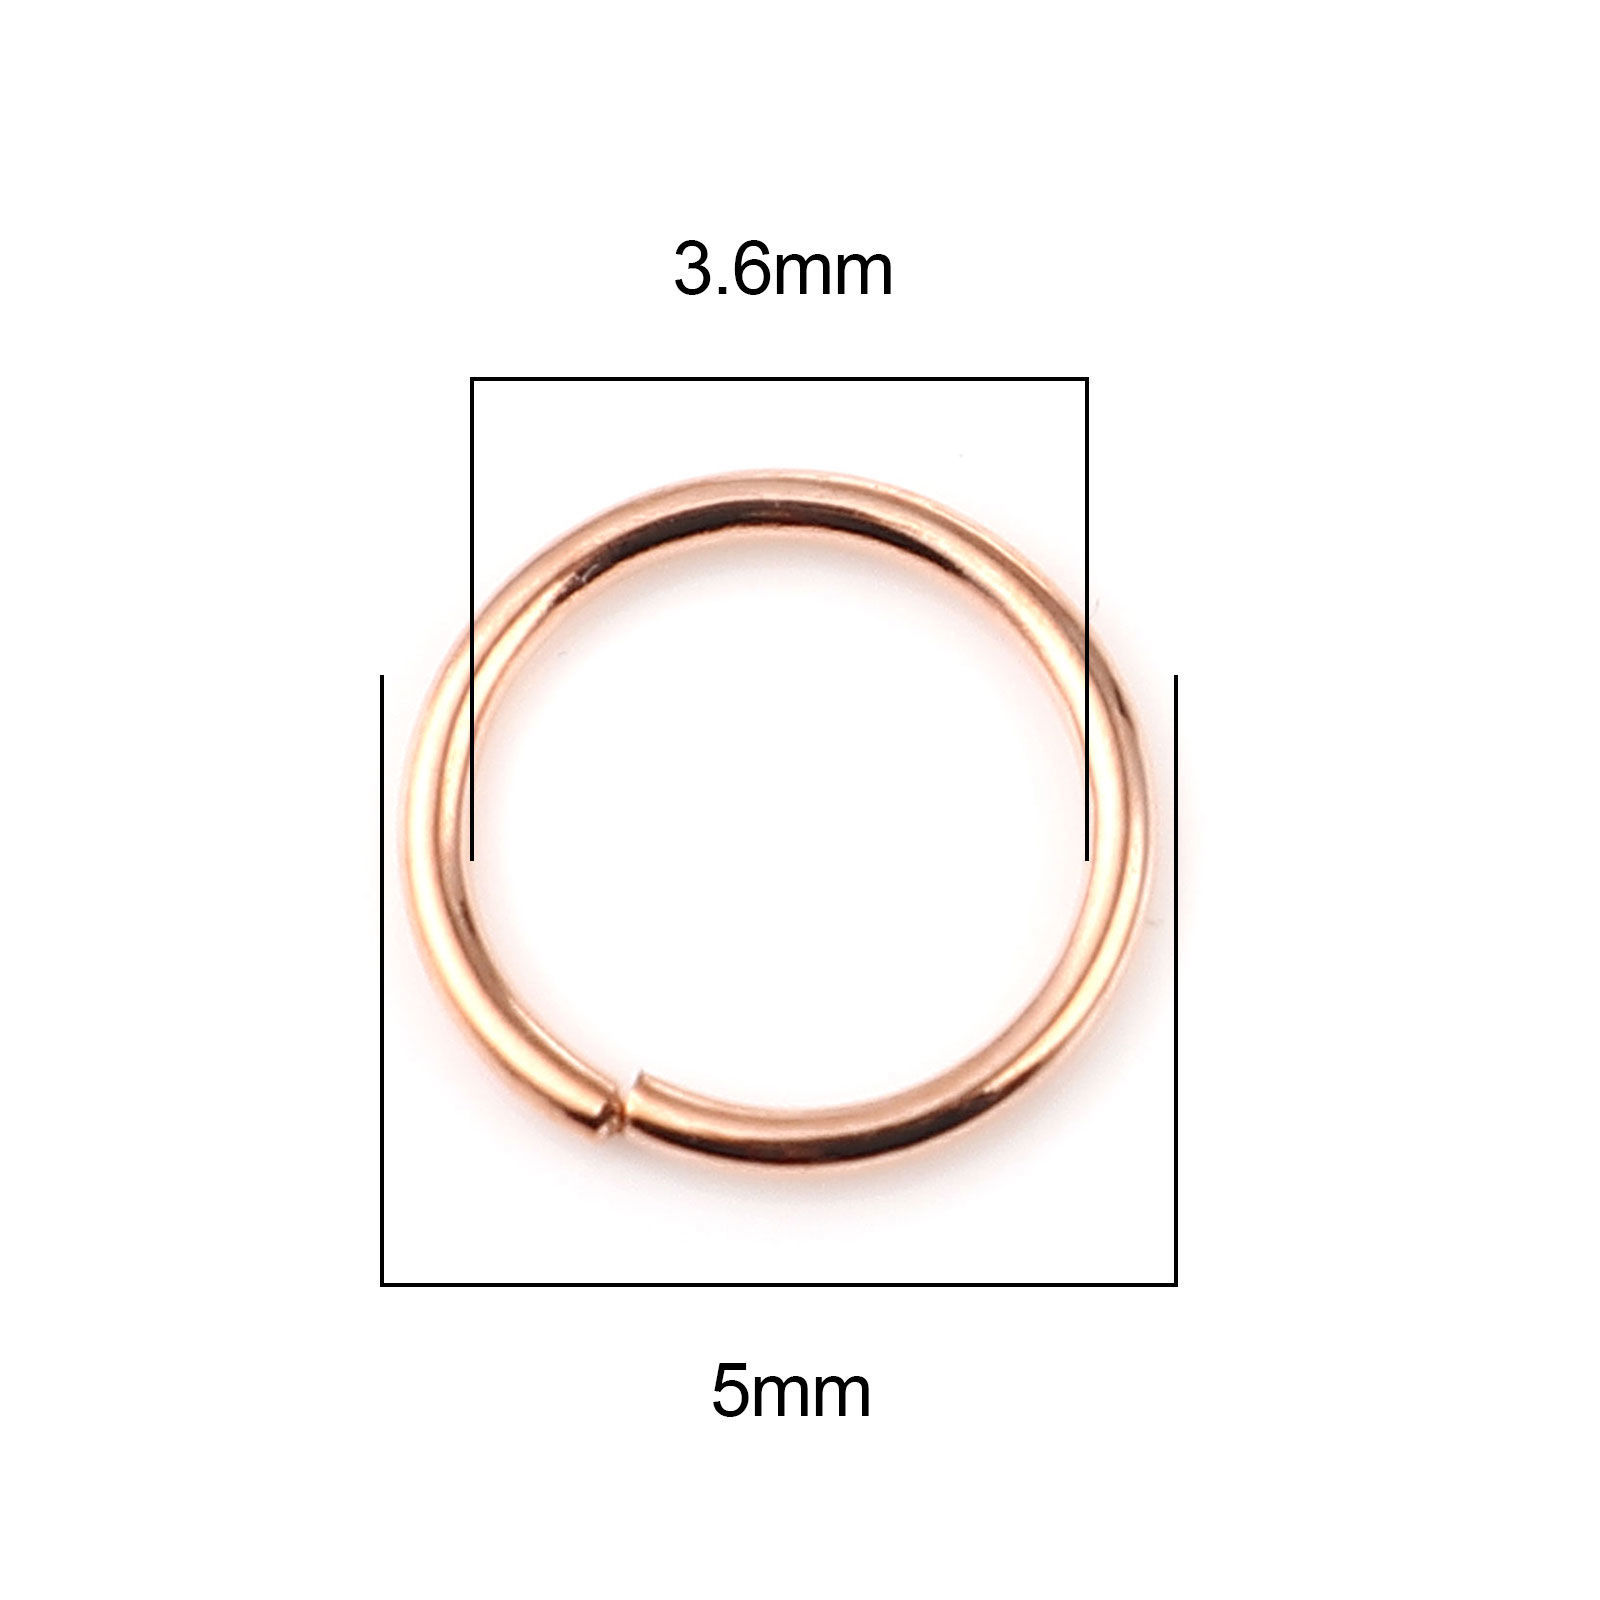 Picture of 0.7mm Iron Based Alloy Open Jump Rings Findings Circle Ring At Random 5mm Dia, 200 PCs